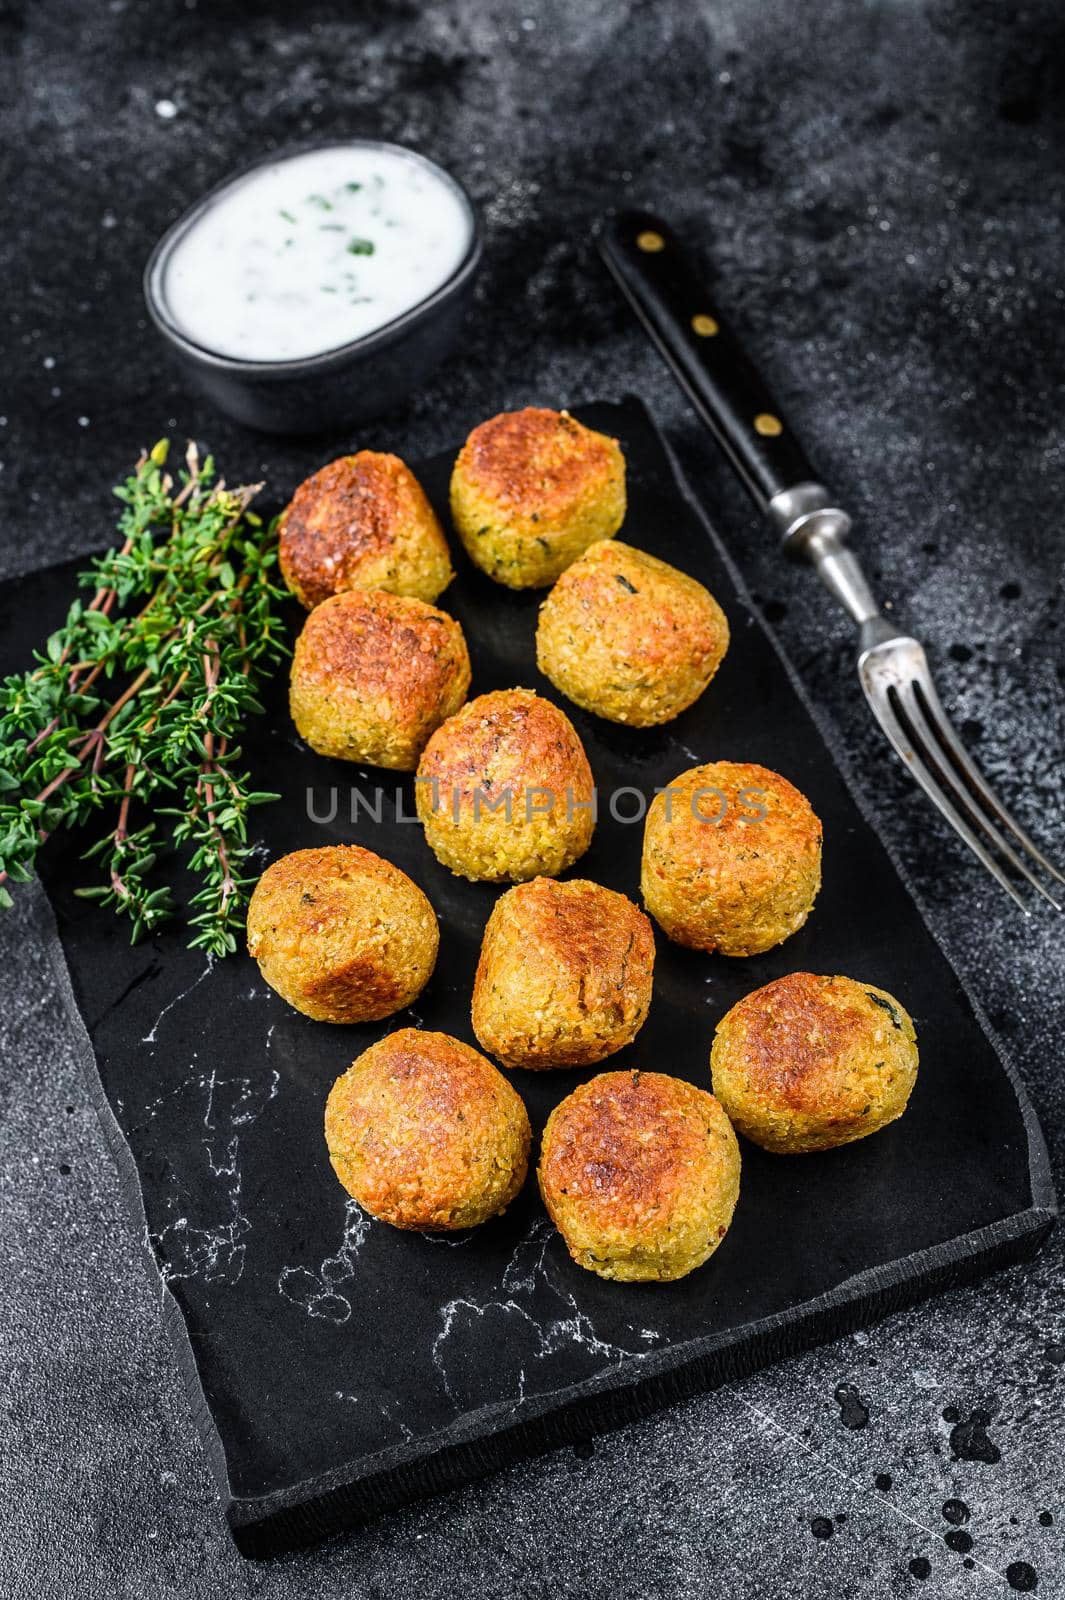 Roasted vegetarian falafel balls from spiced chickpeas with garlic yogurt sauce. Black background. Top view.